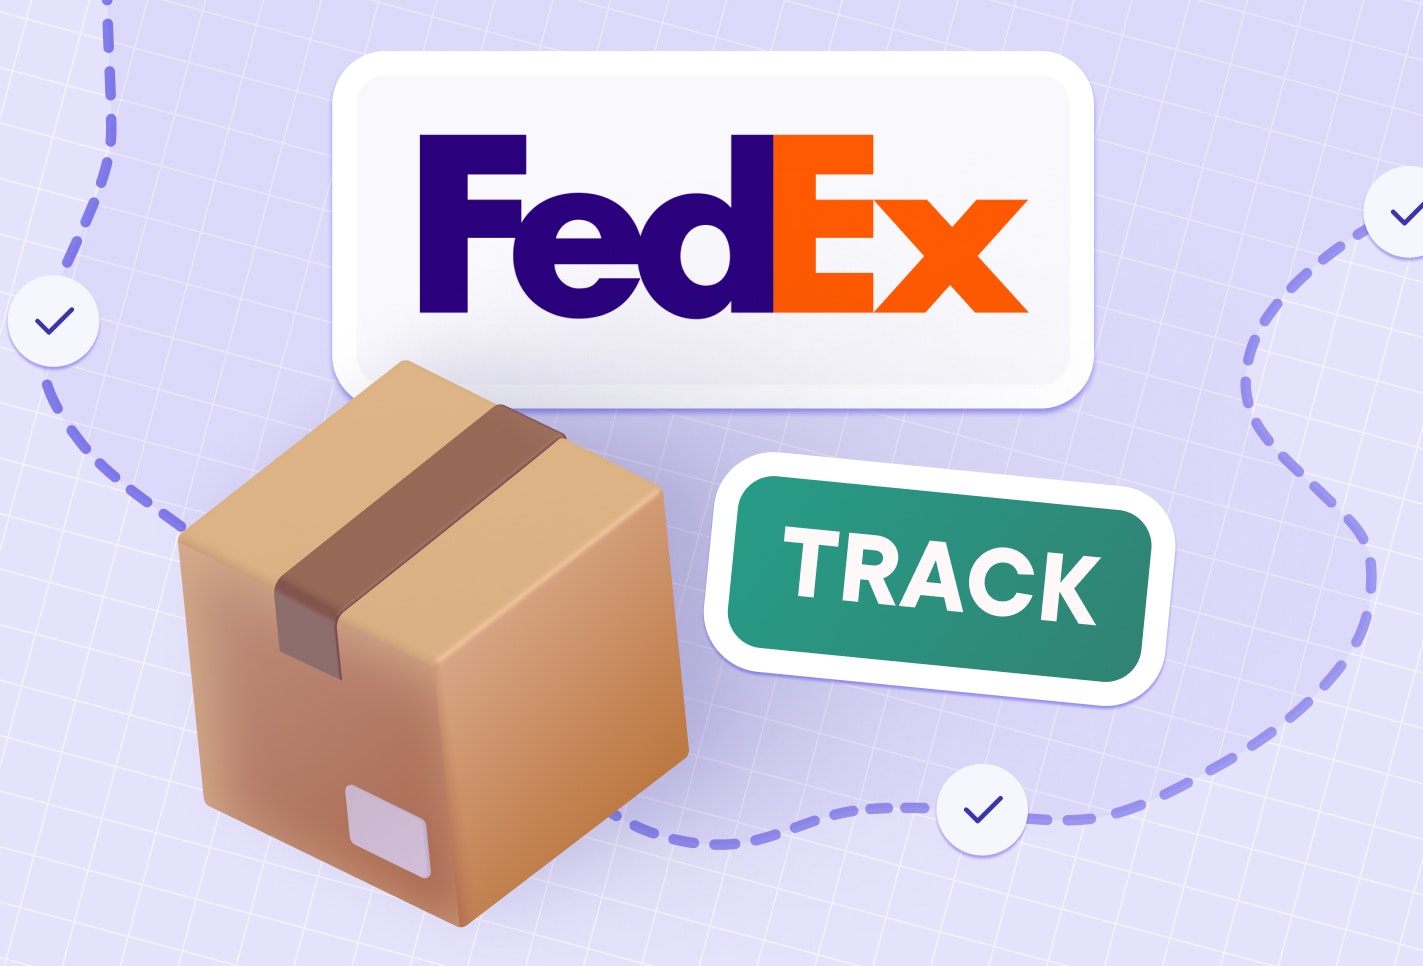 How to track a FedEx package